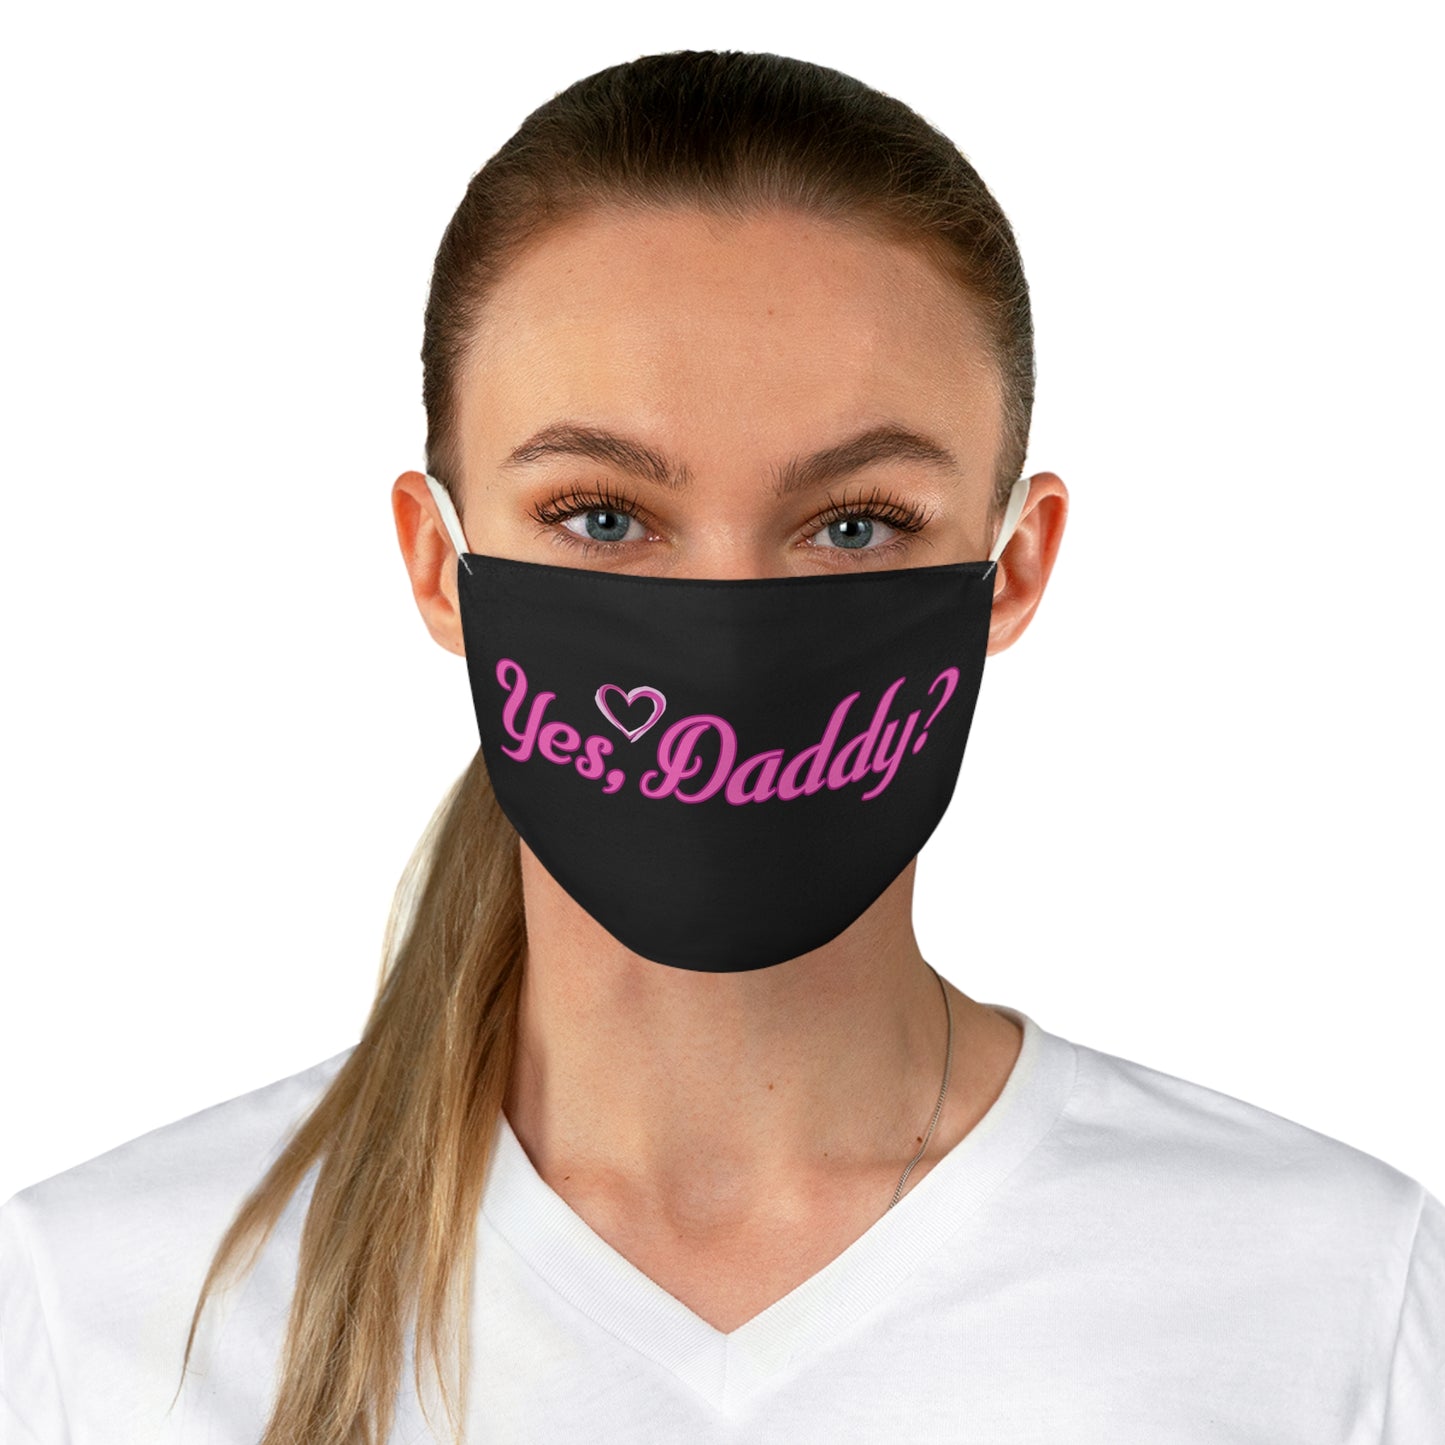 Copy of Yes, Daddy? Fabric Face Mask |